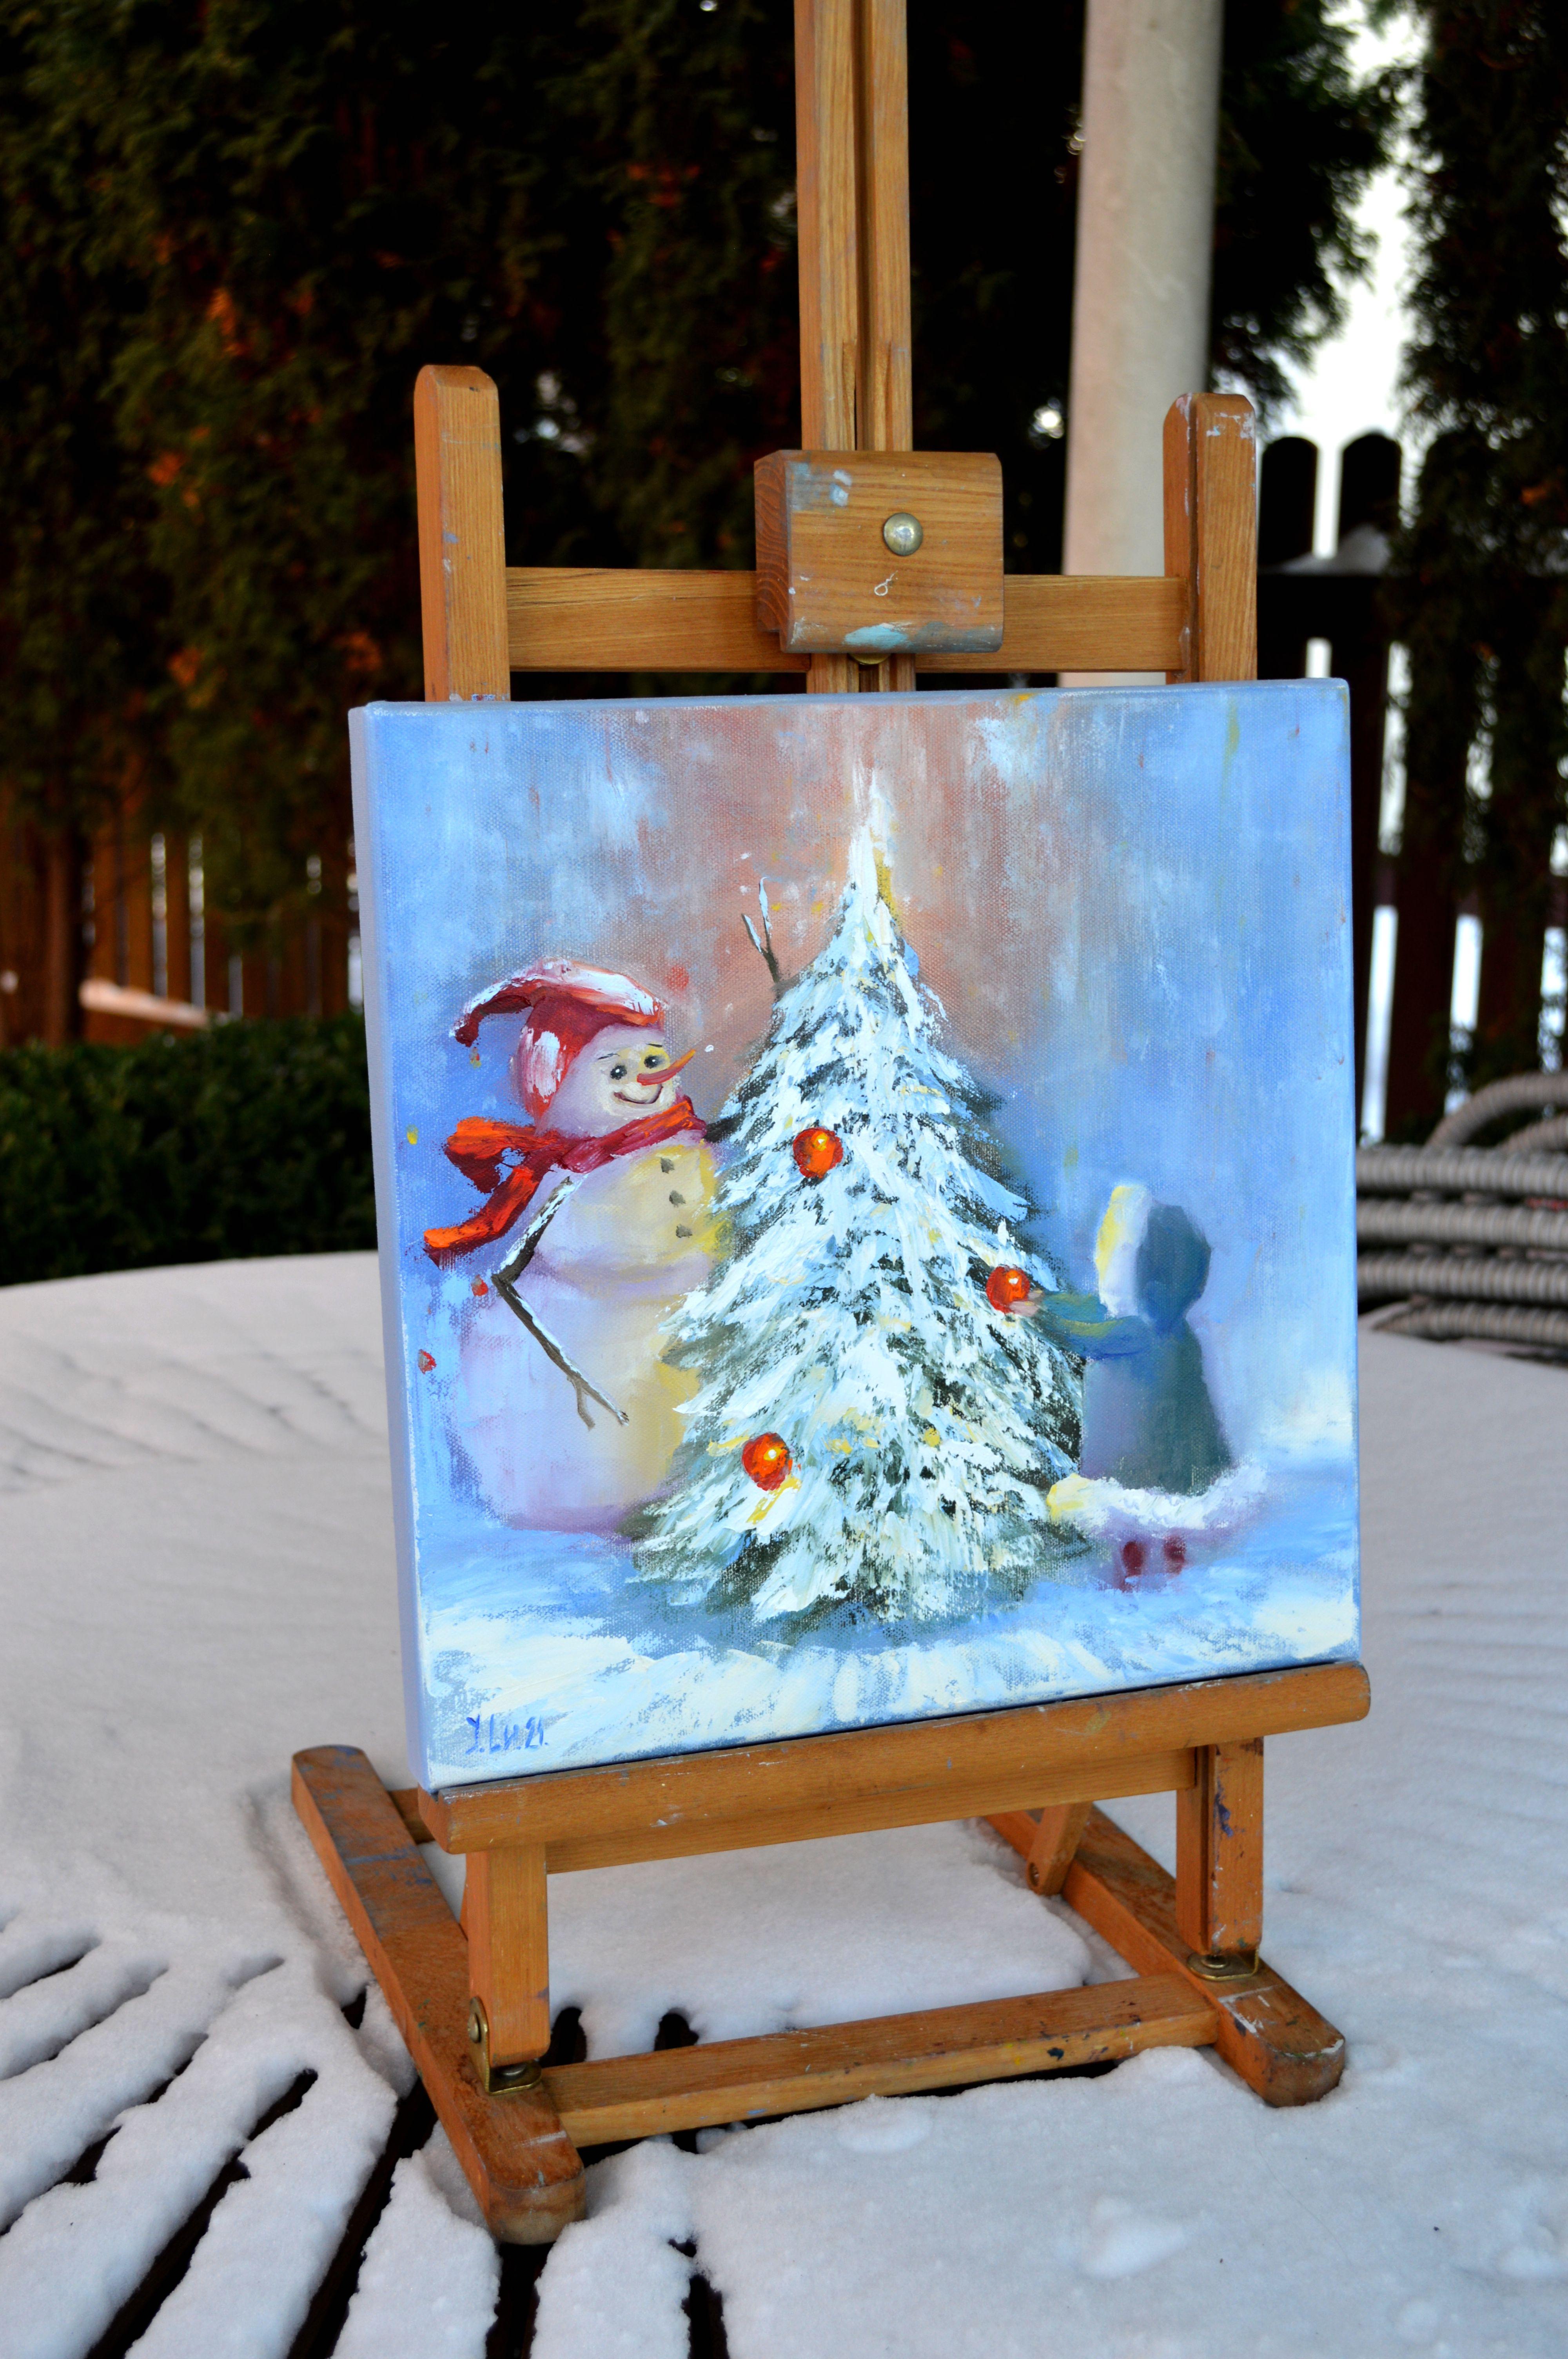 In my creation, I've captured the essence of holiday delight. Through the vibrant strokes of oil, I've woven a tale of innocence and joy. The snowman, adorned with a playful red scarf, embodies the pure spirit of winter fun, while the child, poised